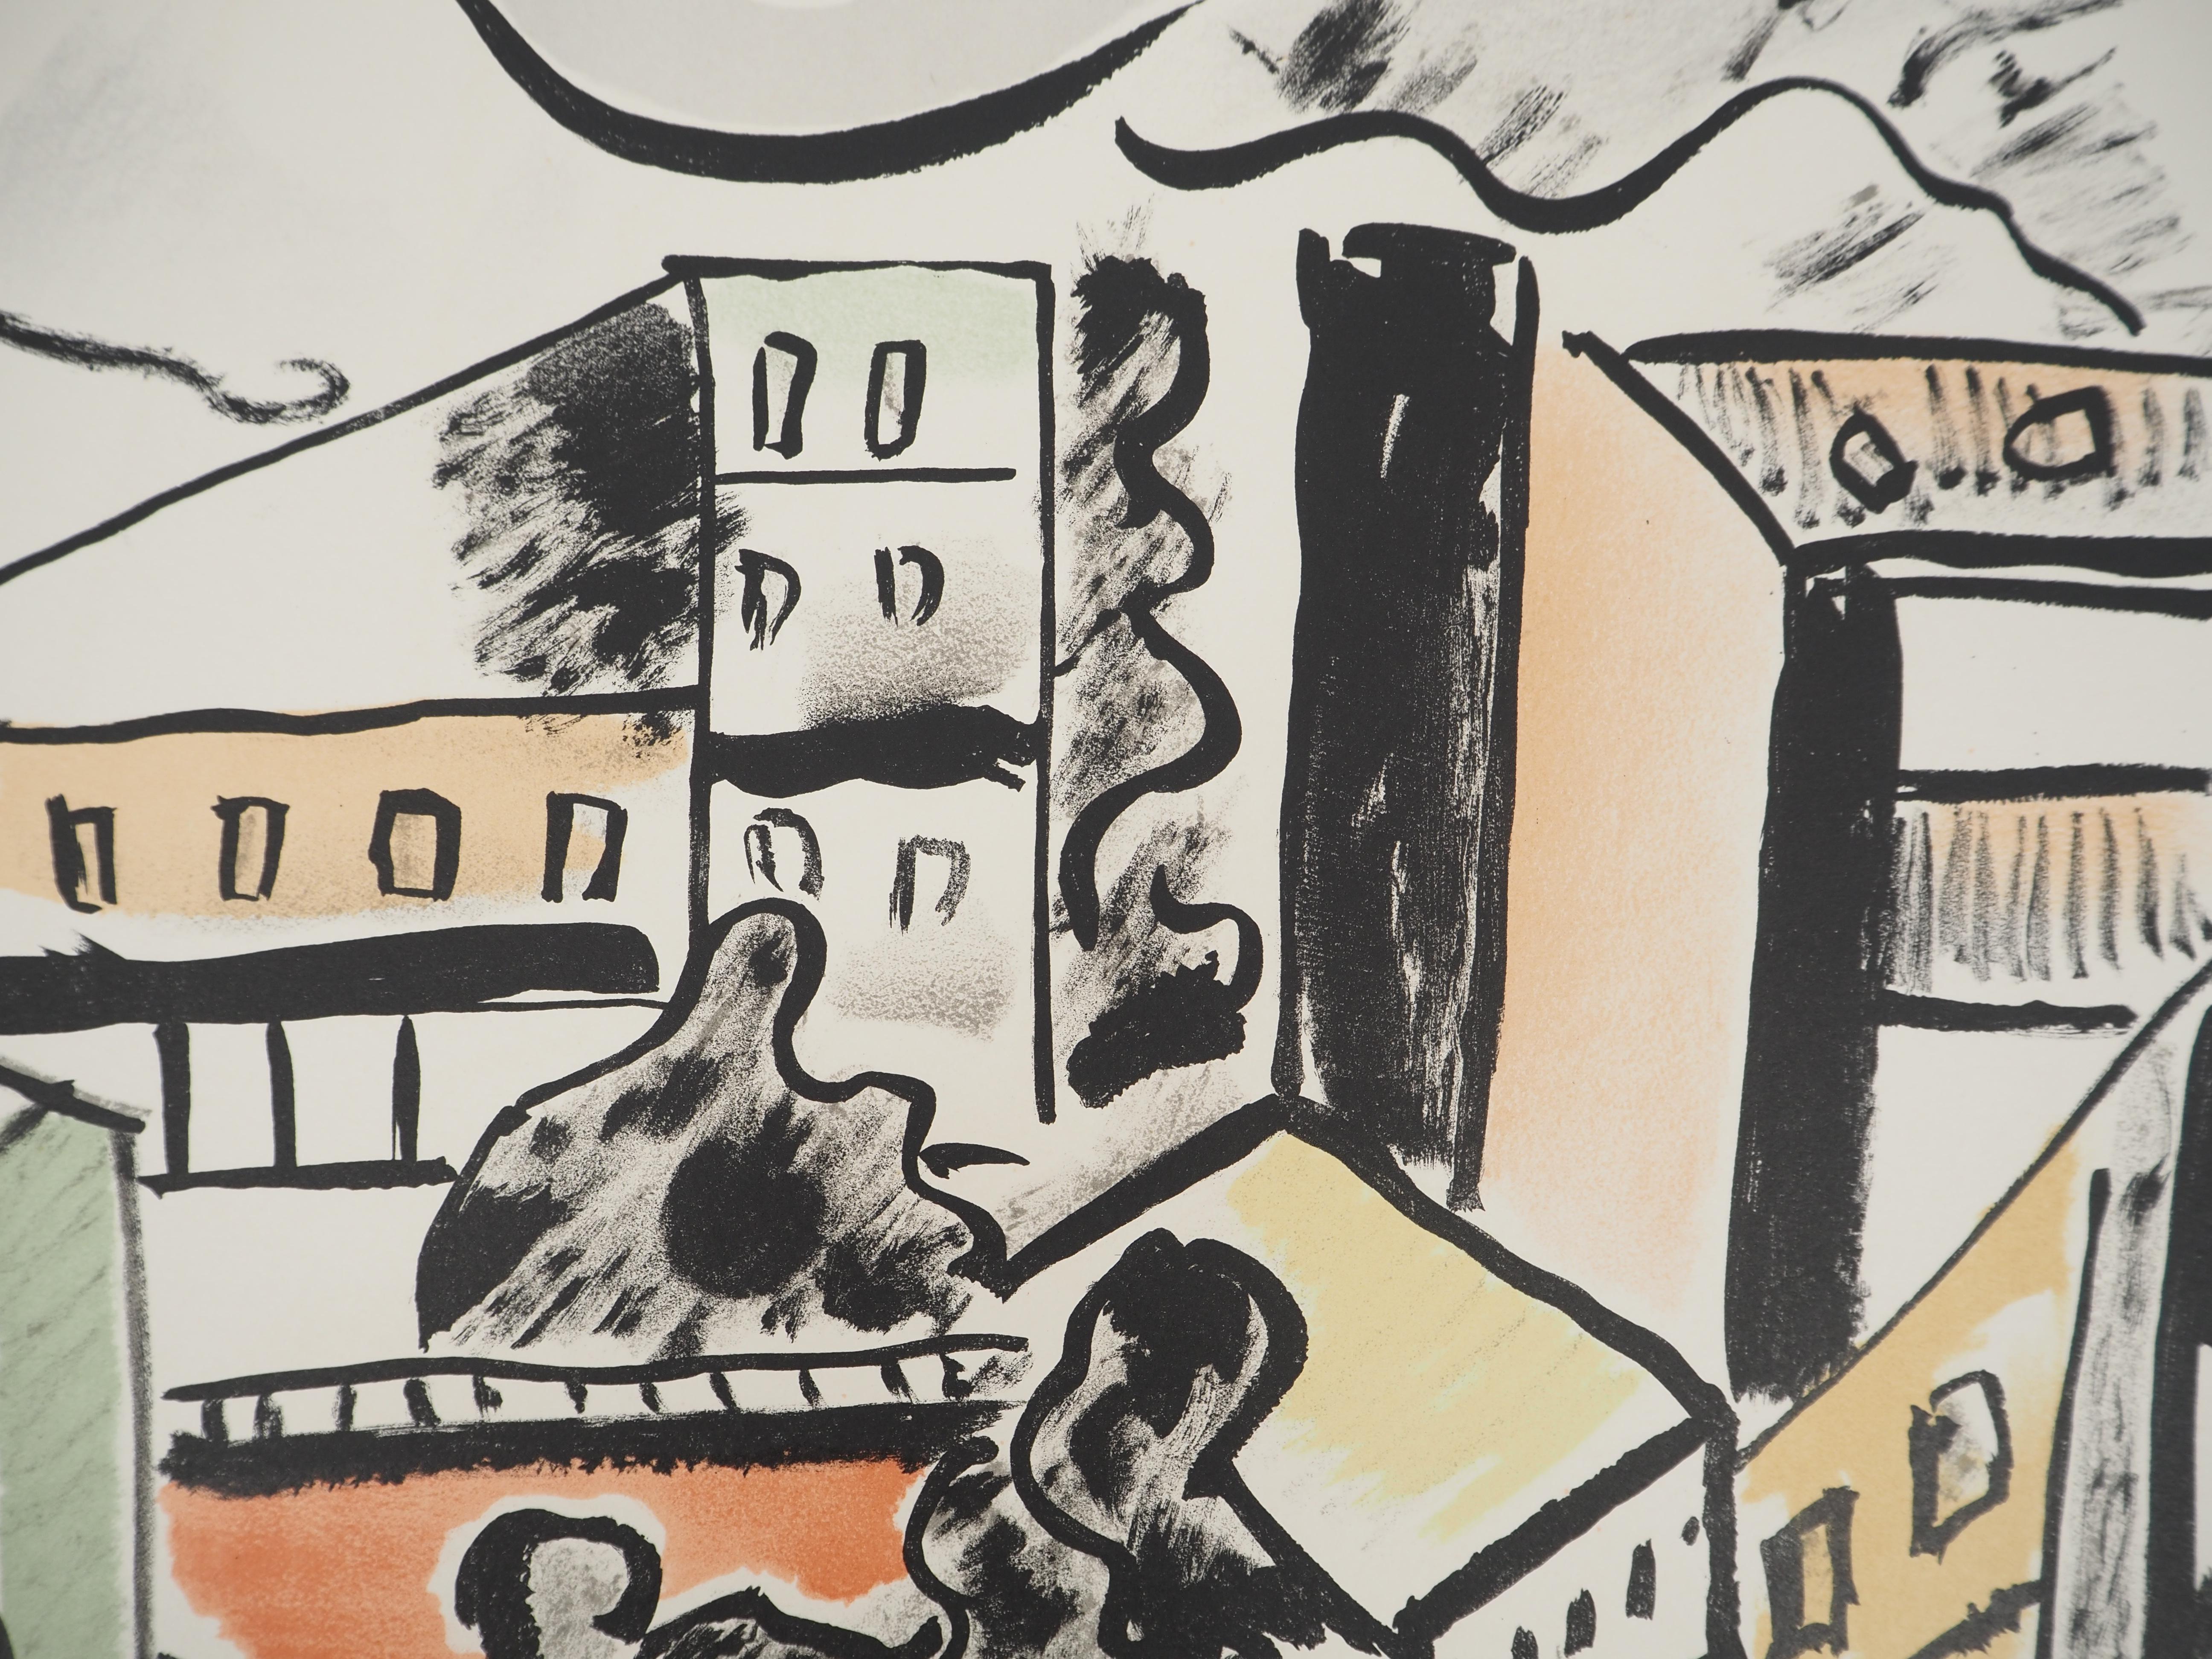 Fernand Léger
The roofs, 1959

Original lithograph (Atelier Mourlot)
Signed with the artist's stamp
Limited to 180 copies (Here numbered 160)
On Arches vellum  66 x 50.5 cm (c. 25.9 x 19.6 in)

REFERENCES :
- Catalog raisonne Saphire p.